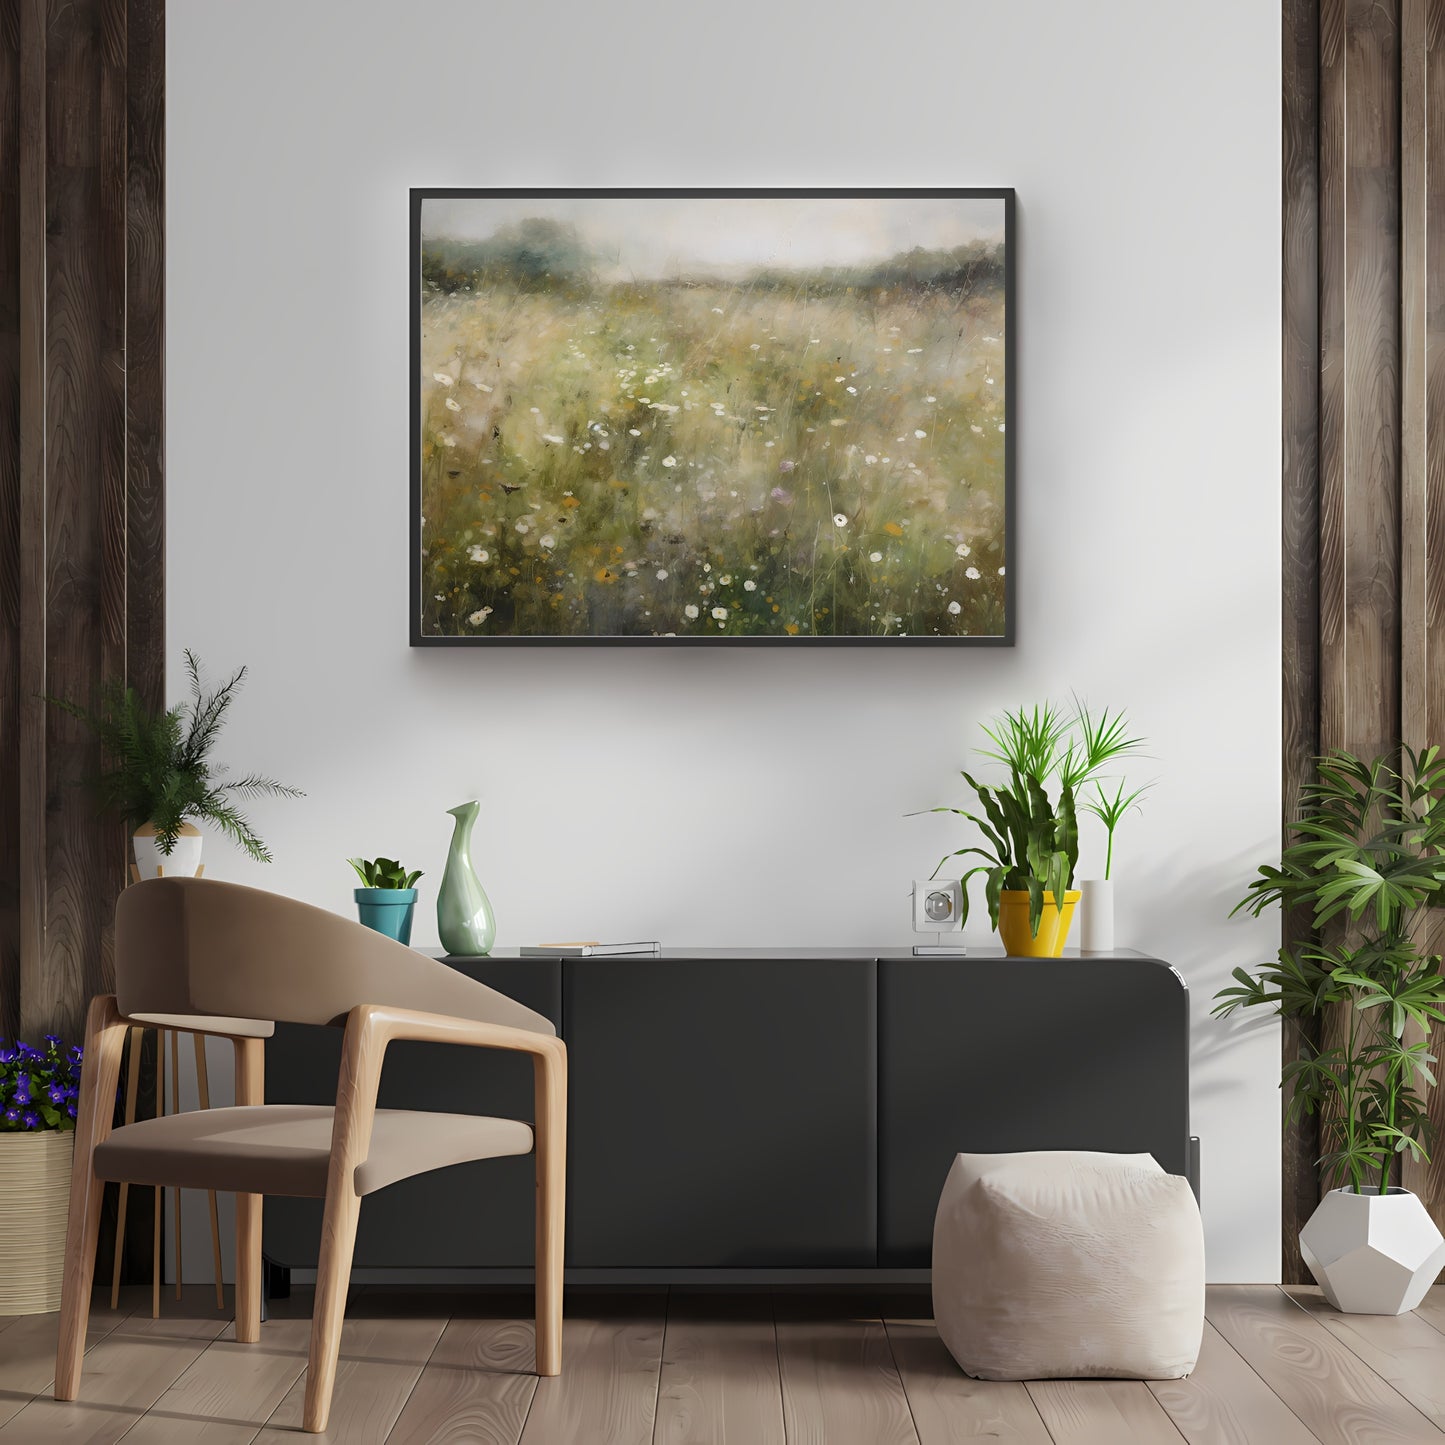 Wildflower Meadow Impressionist Wall Art Paper Poster Prints Vintage Oil Painting, Dreamy , Abstract Style, Blurred Landscape, Enchanting Nature Home Decor